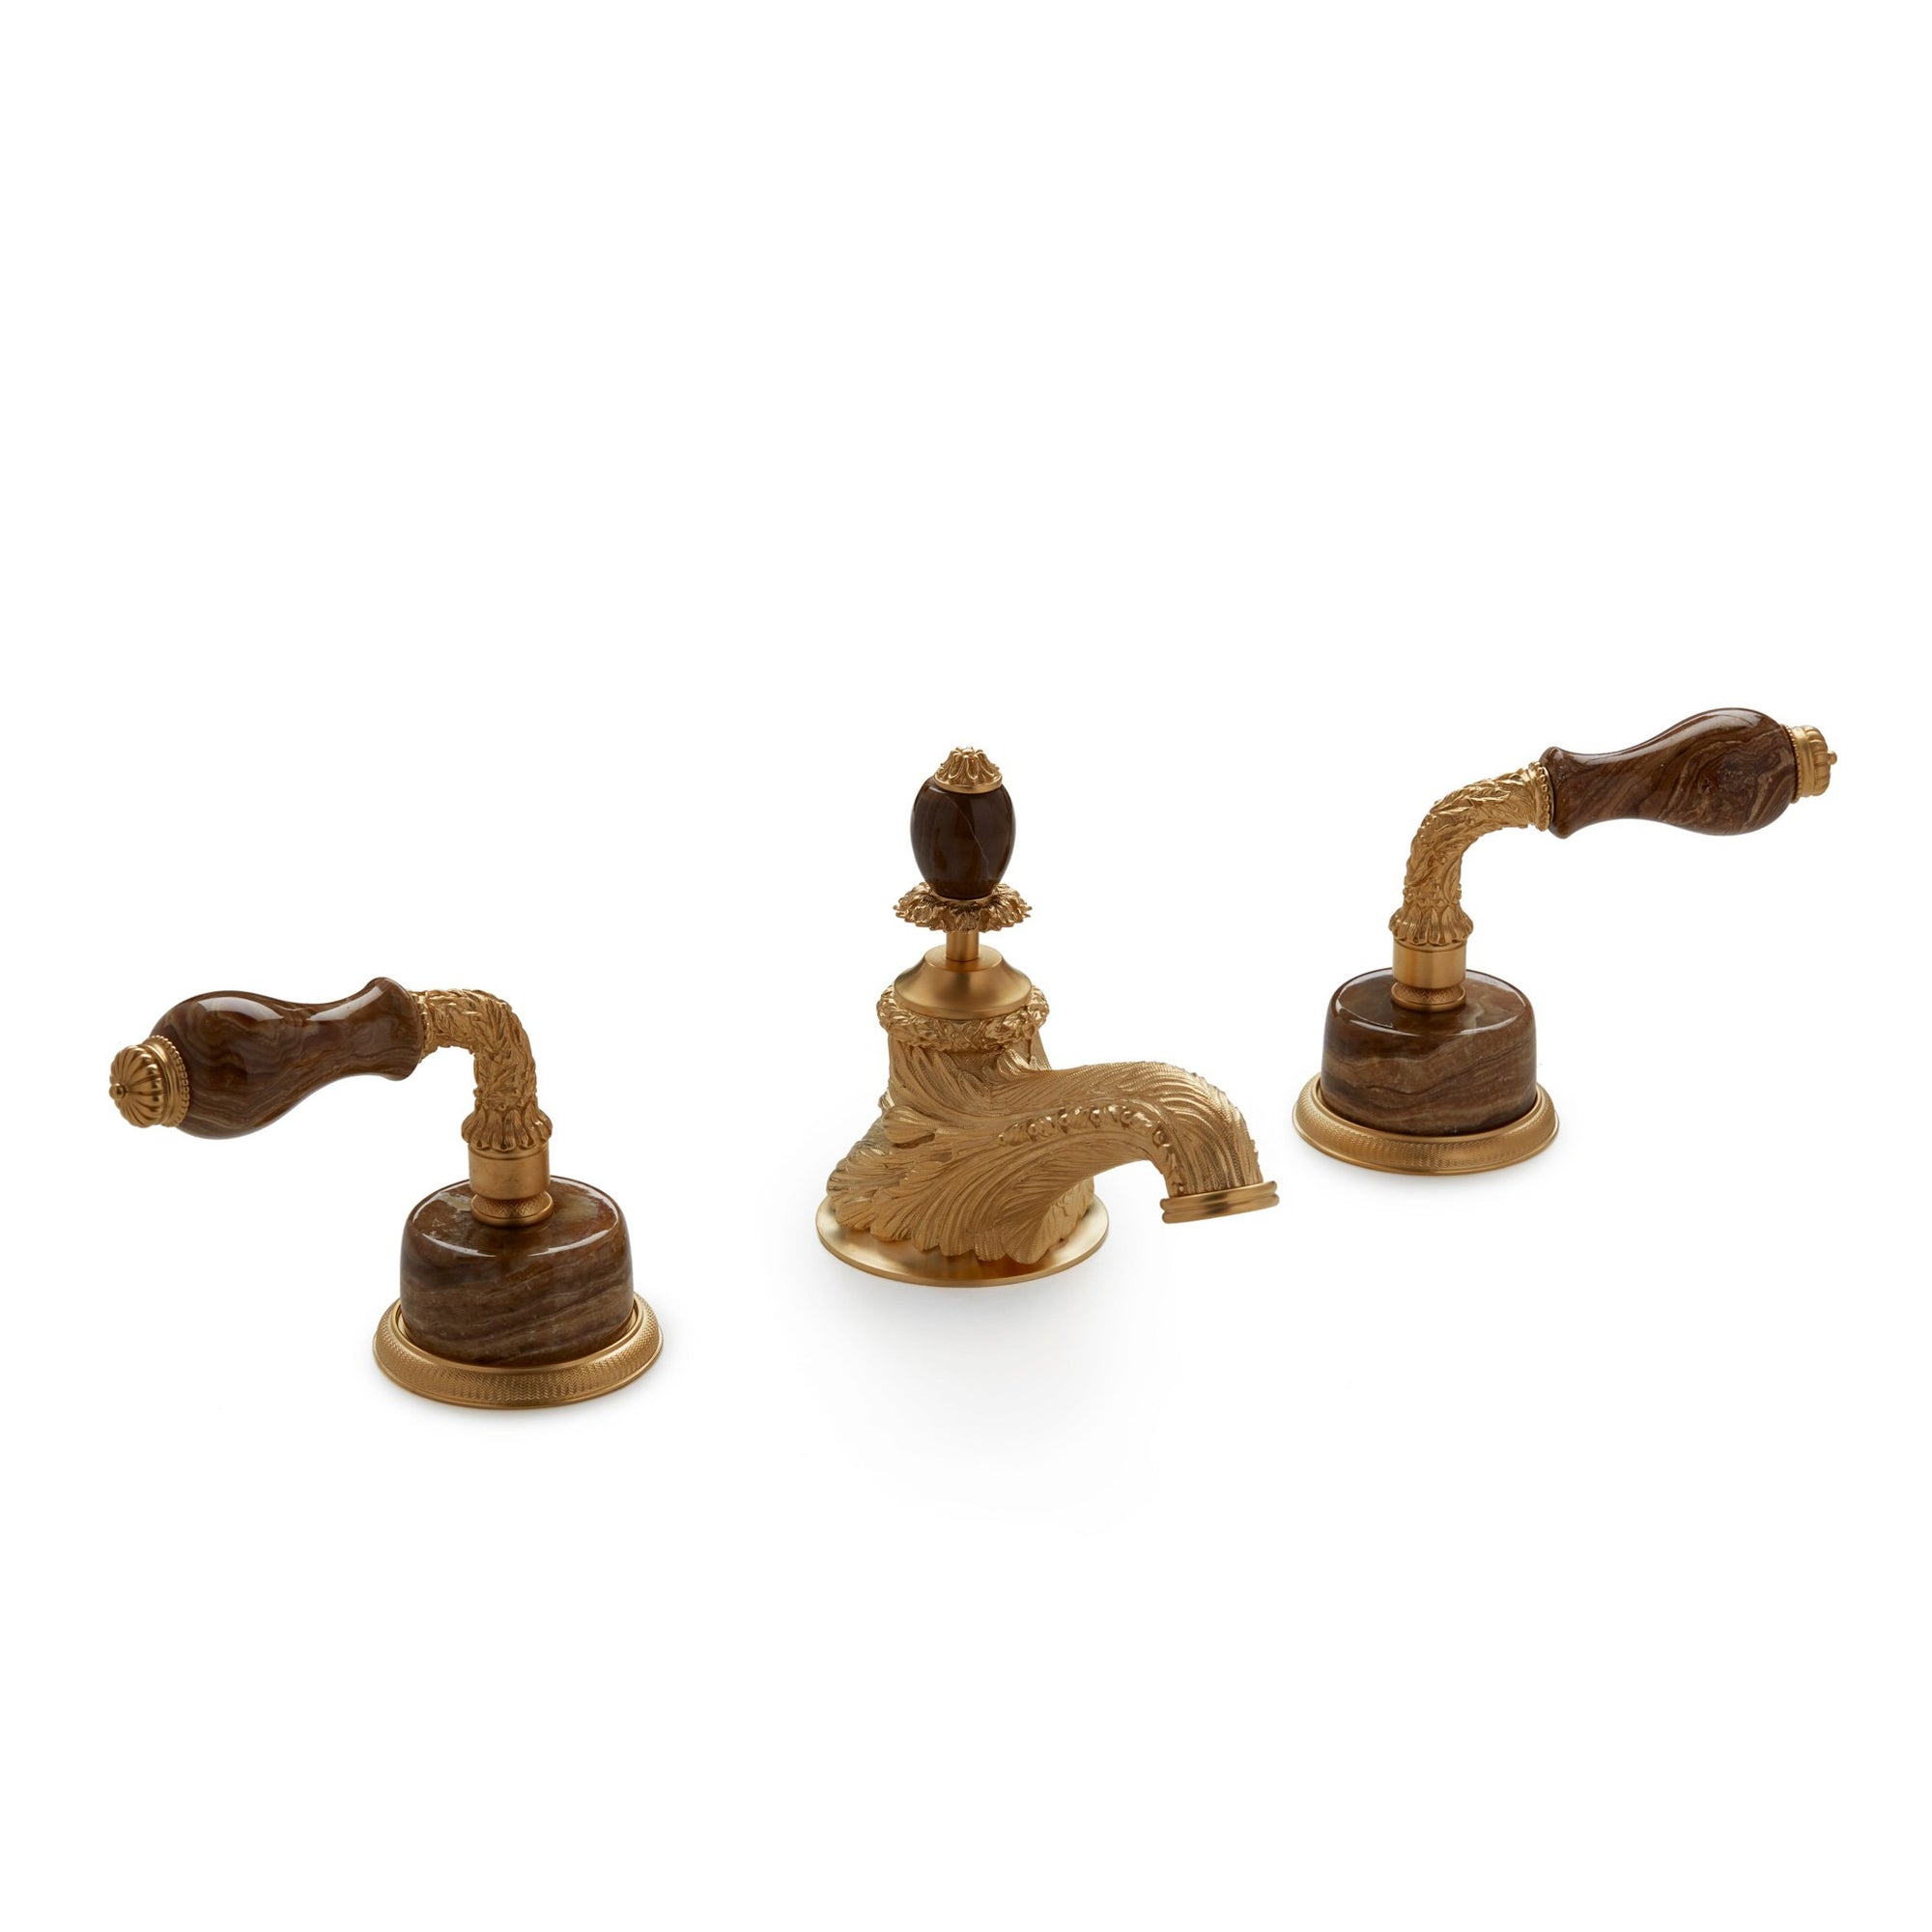 1030BSN819-BROX-GP Sherle Wagner International Onyx Laurel Lever Faucet Set in Gold Plate metal finish with Brown Onyx inserts